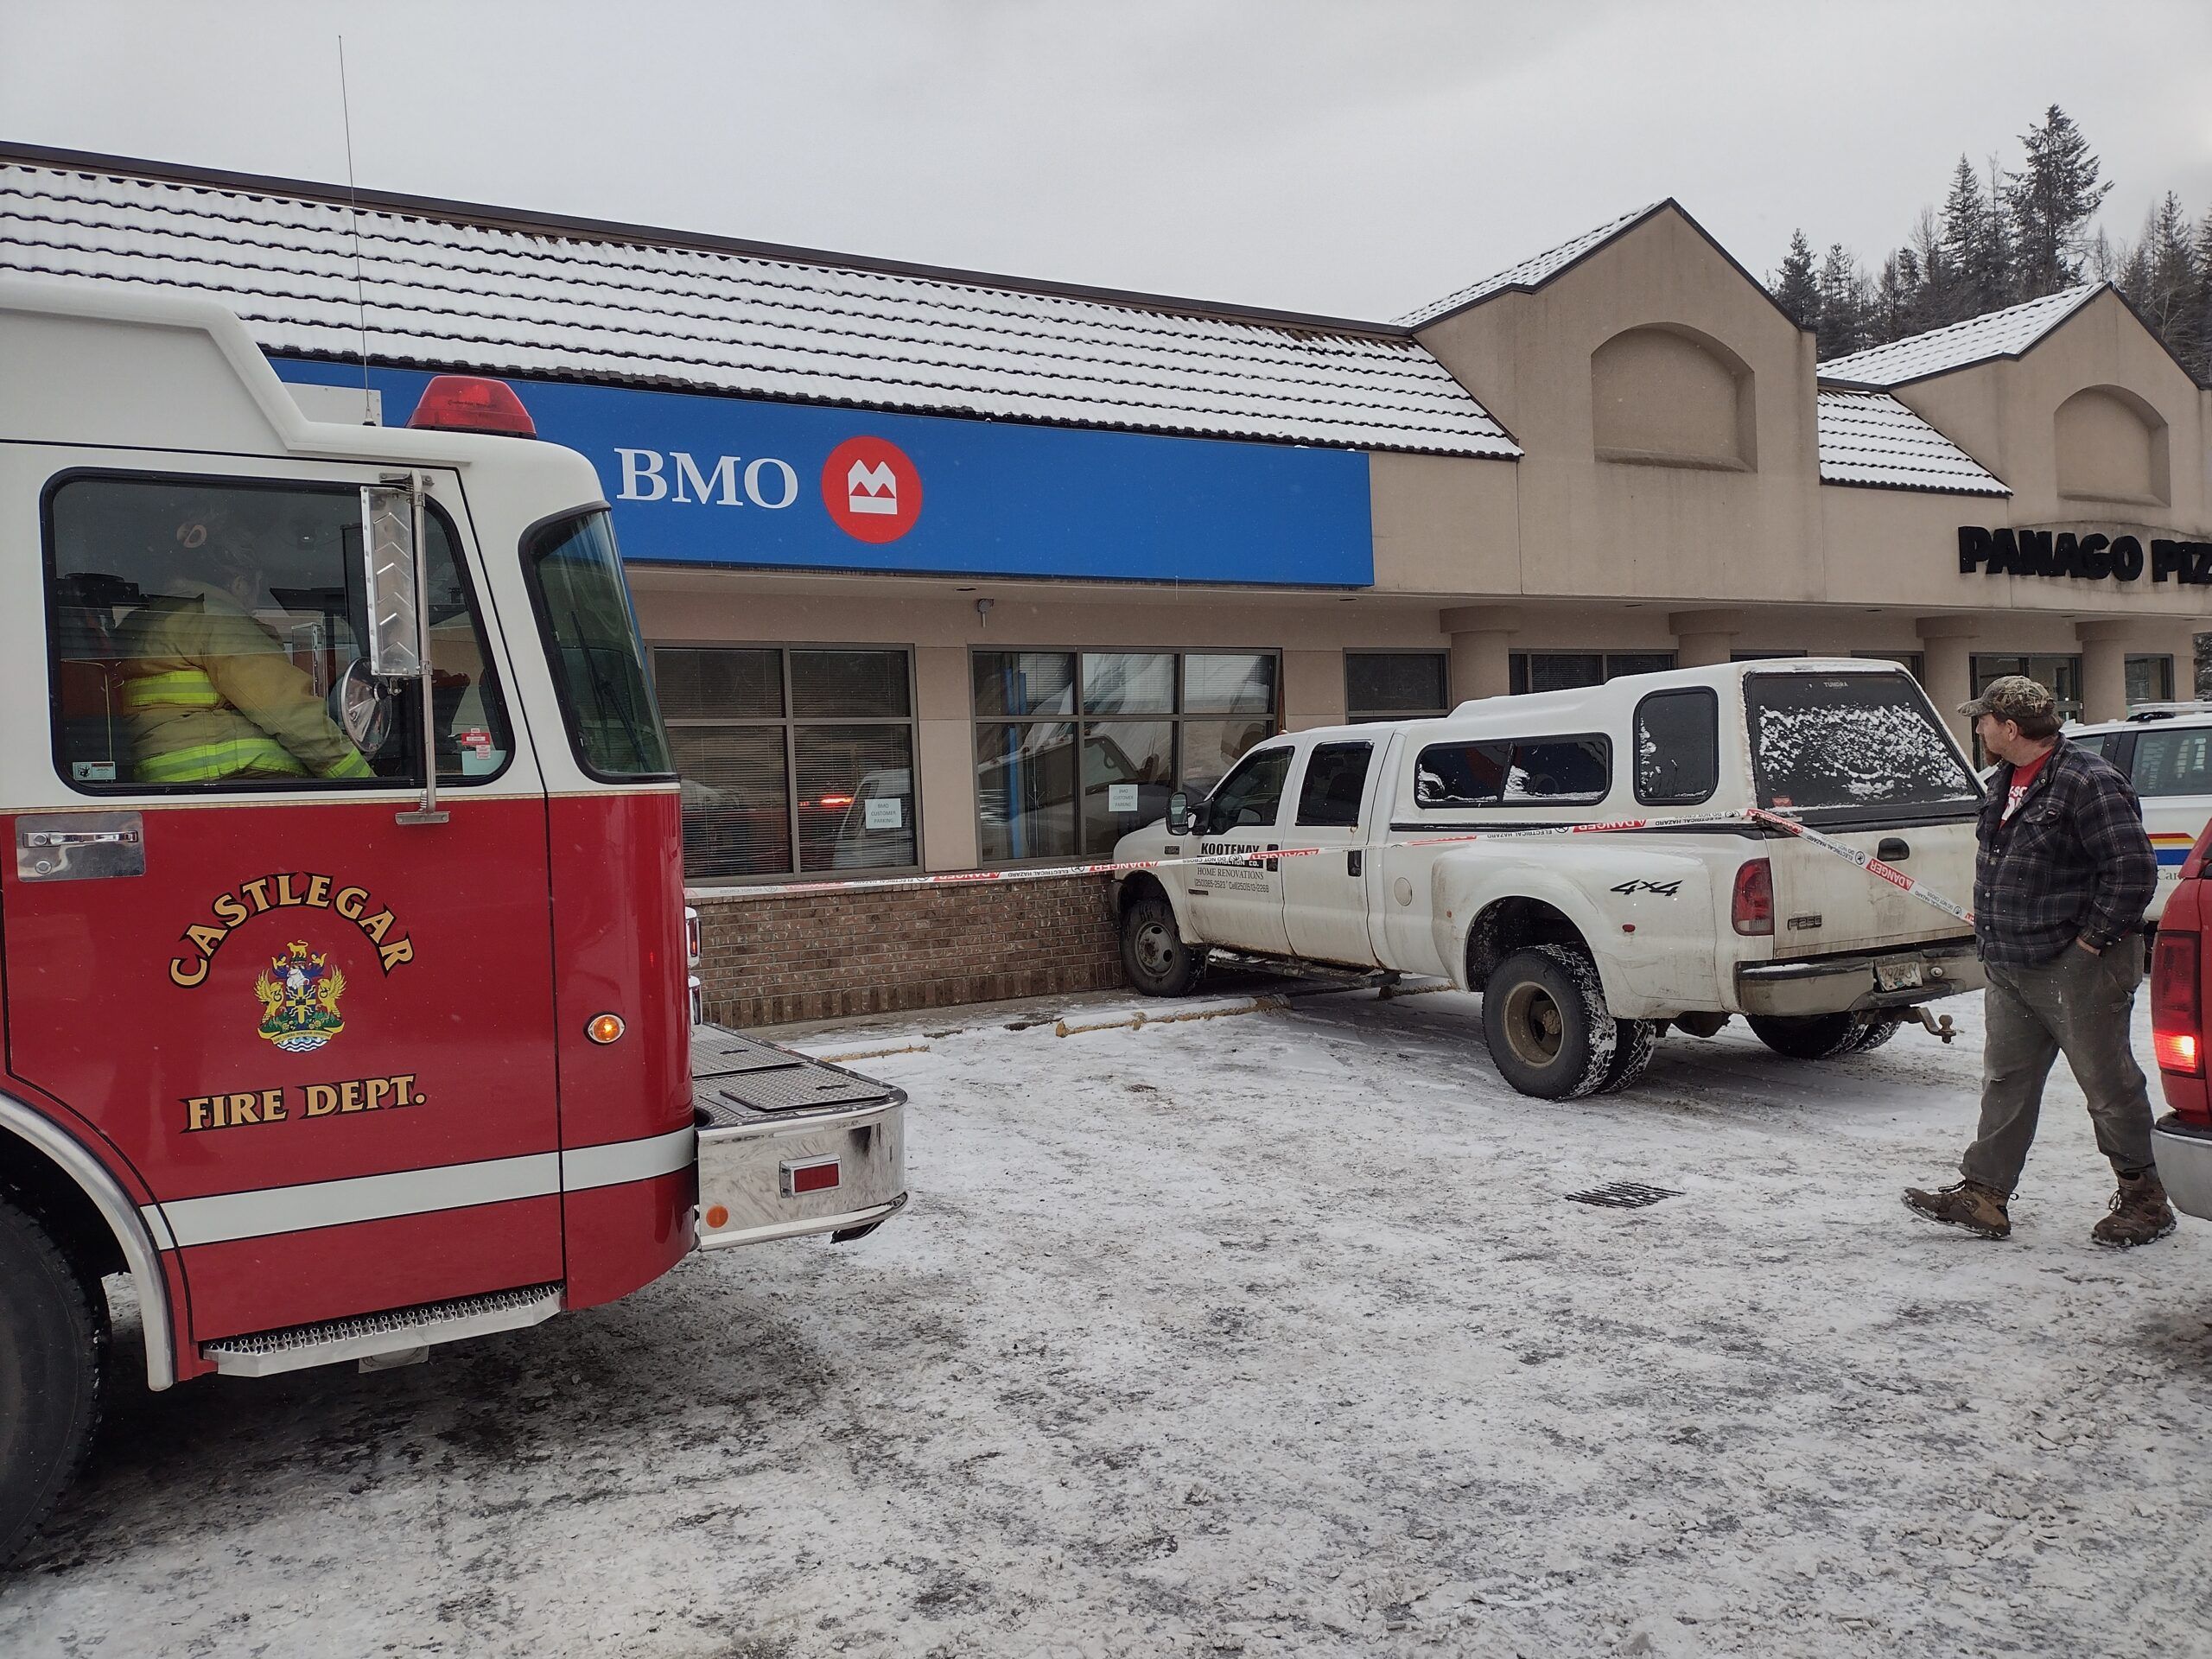 A truck hit a bank in Castlegar this afternoon, resulting in injuries to one person. (Greg Nesteroff/Vista Radio)